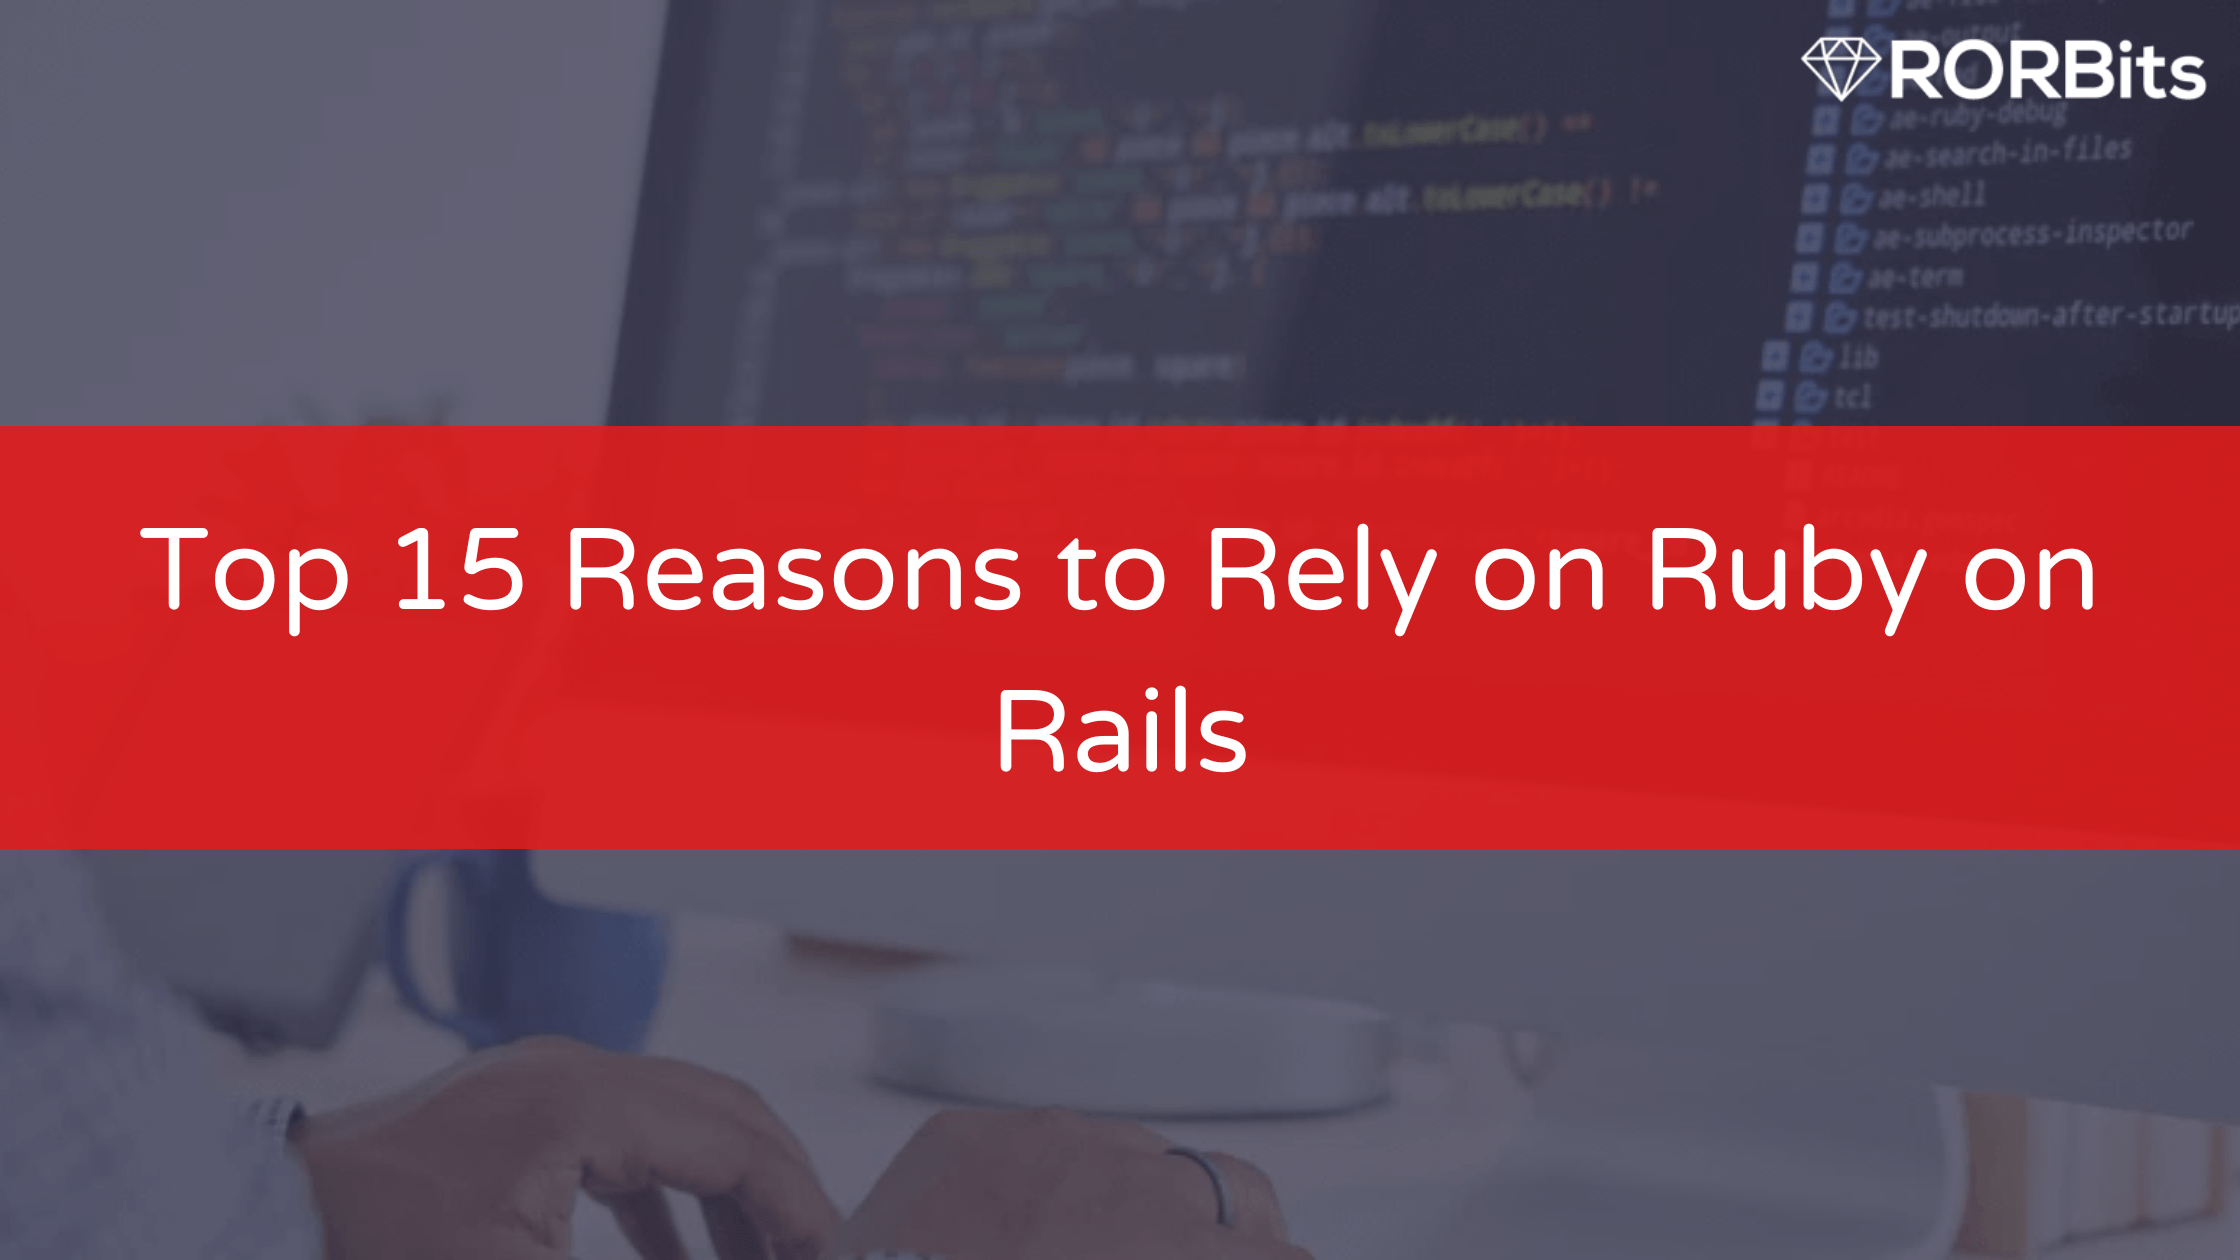 Top 15 Reasons to Rely on Ruby on Rails